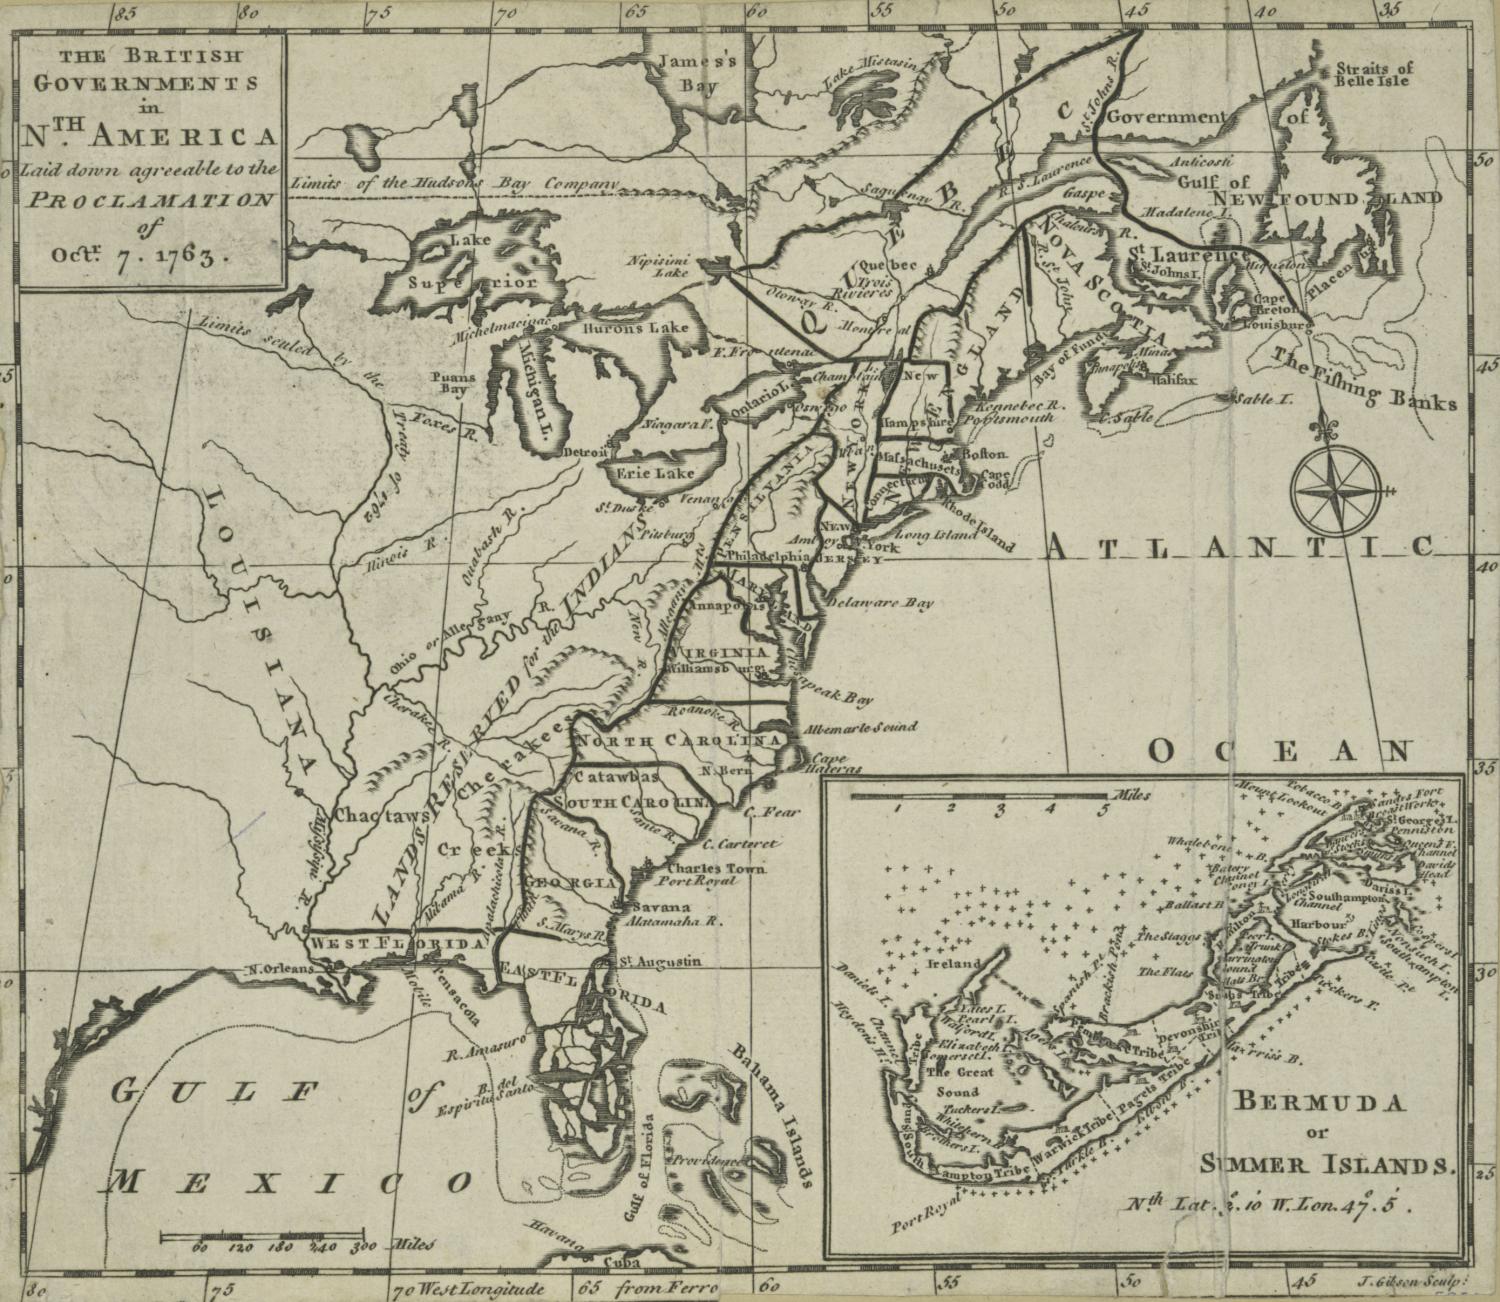 Map of North American colonies, 1763